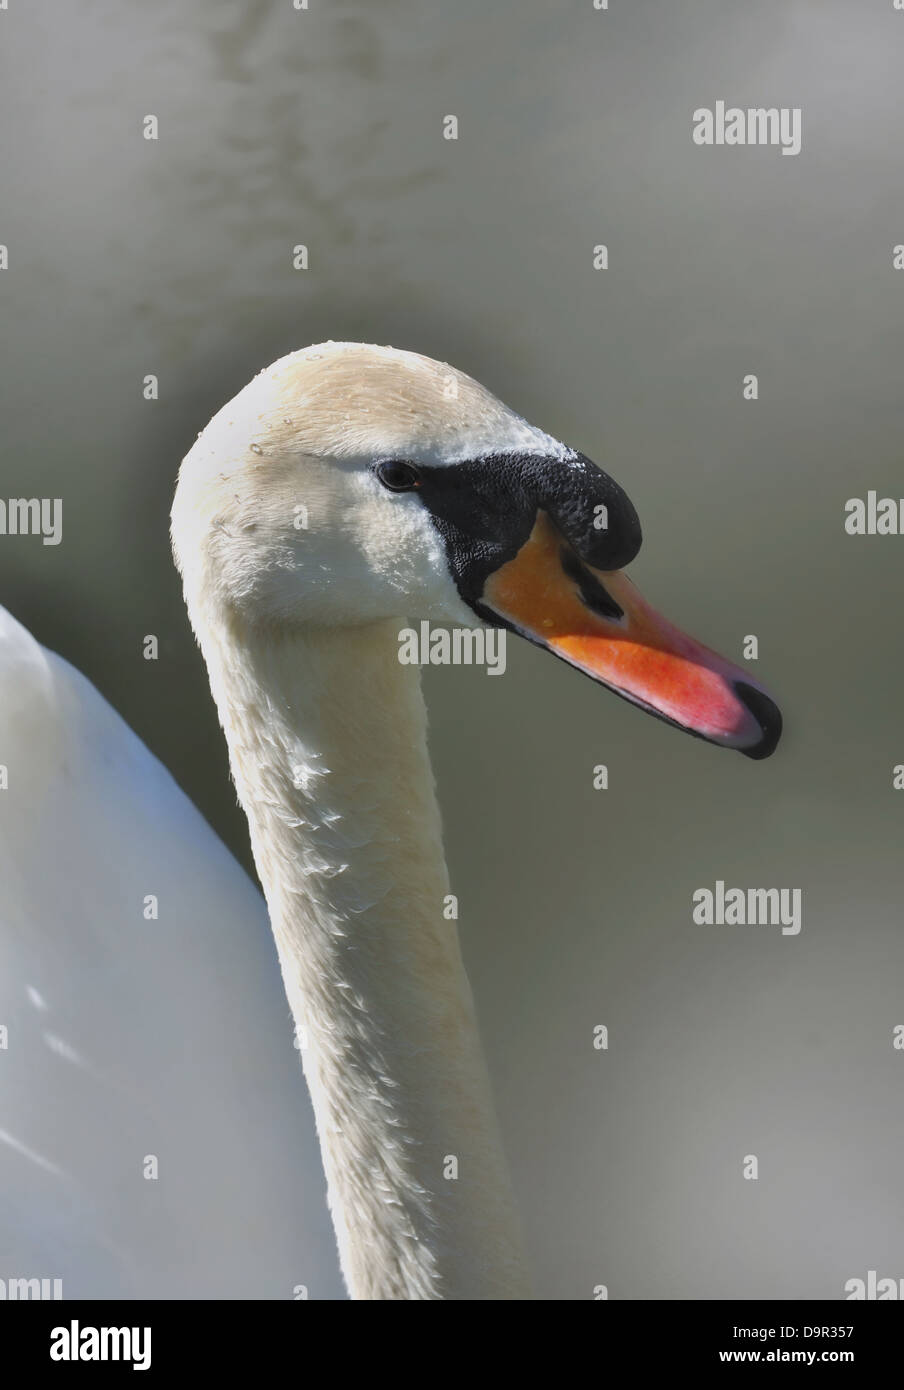 close up of a swan profile Stock Photo